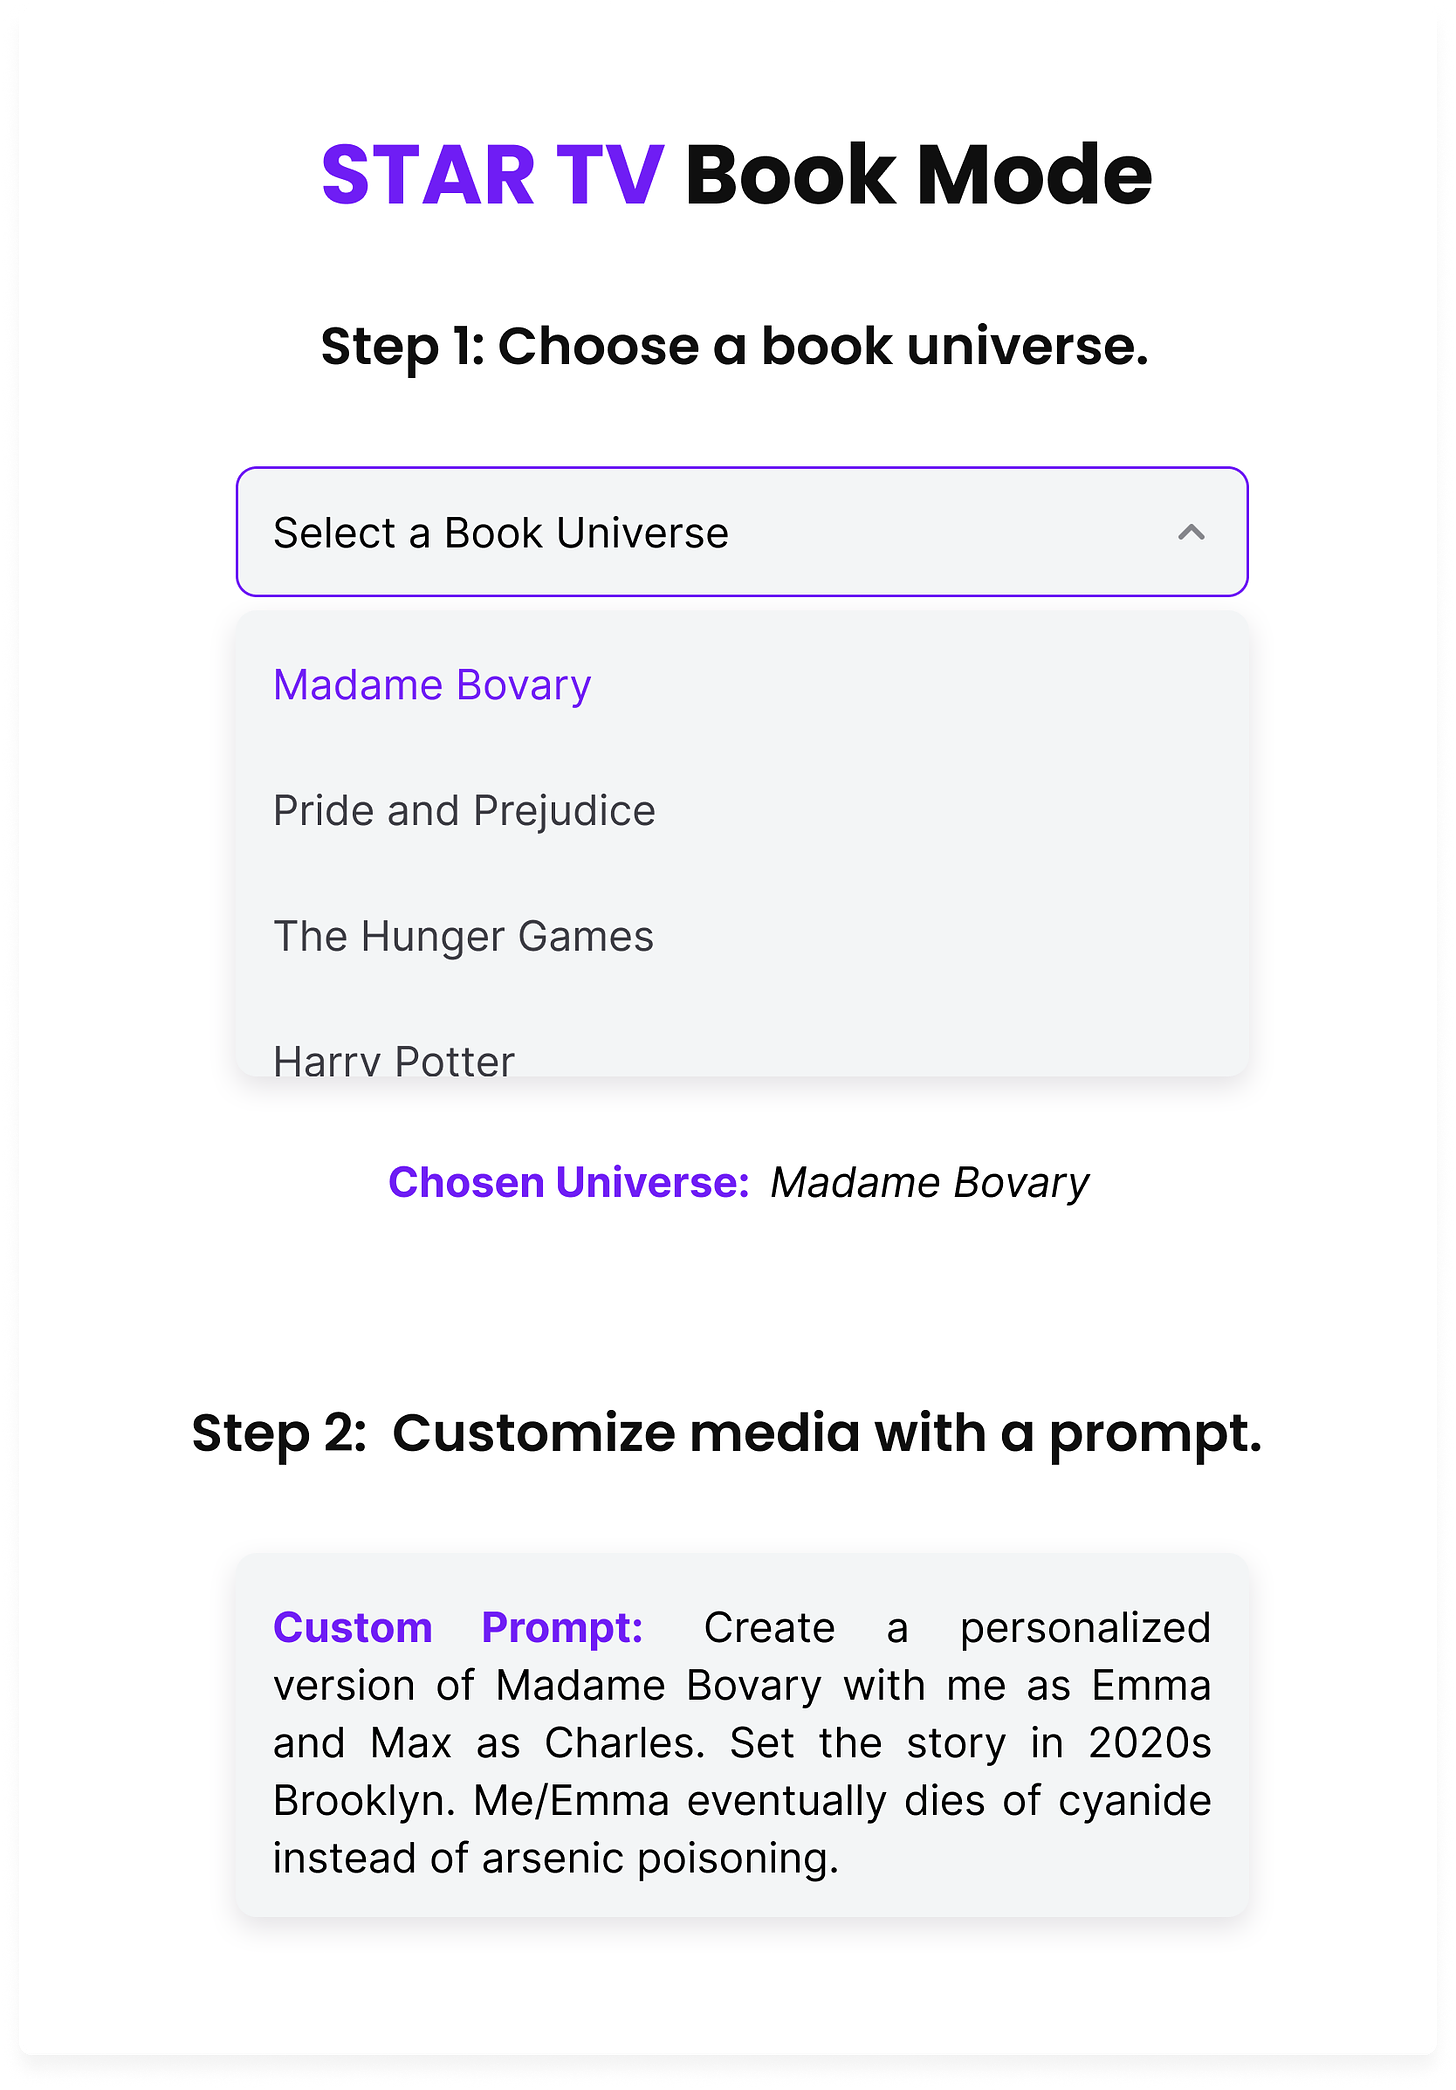 Website screenshot for Star TV Book Mode. Step 1 is to choose a book universe from dropdown menu including Madame Bovary, Pride and Prejudice, Hunger Games, Harry Potter. Madame Bovary is selected. Step 2 is to customize book with prompt. Text box shows prompt to remake Madame Bovary with Kate as Emma and Max as Charles set in 2020s Brooklyn. Emma eventually dies from cyanide poisoning instead of arsenic poisoning.